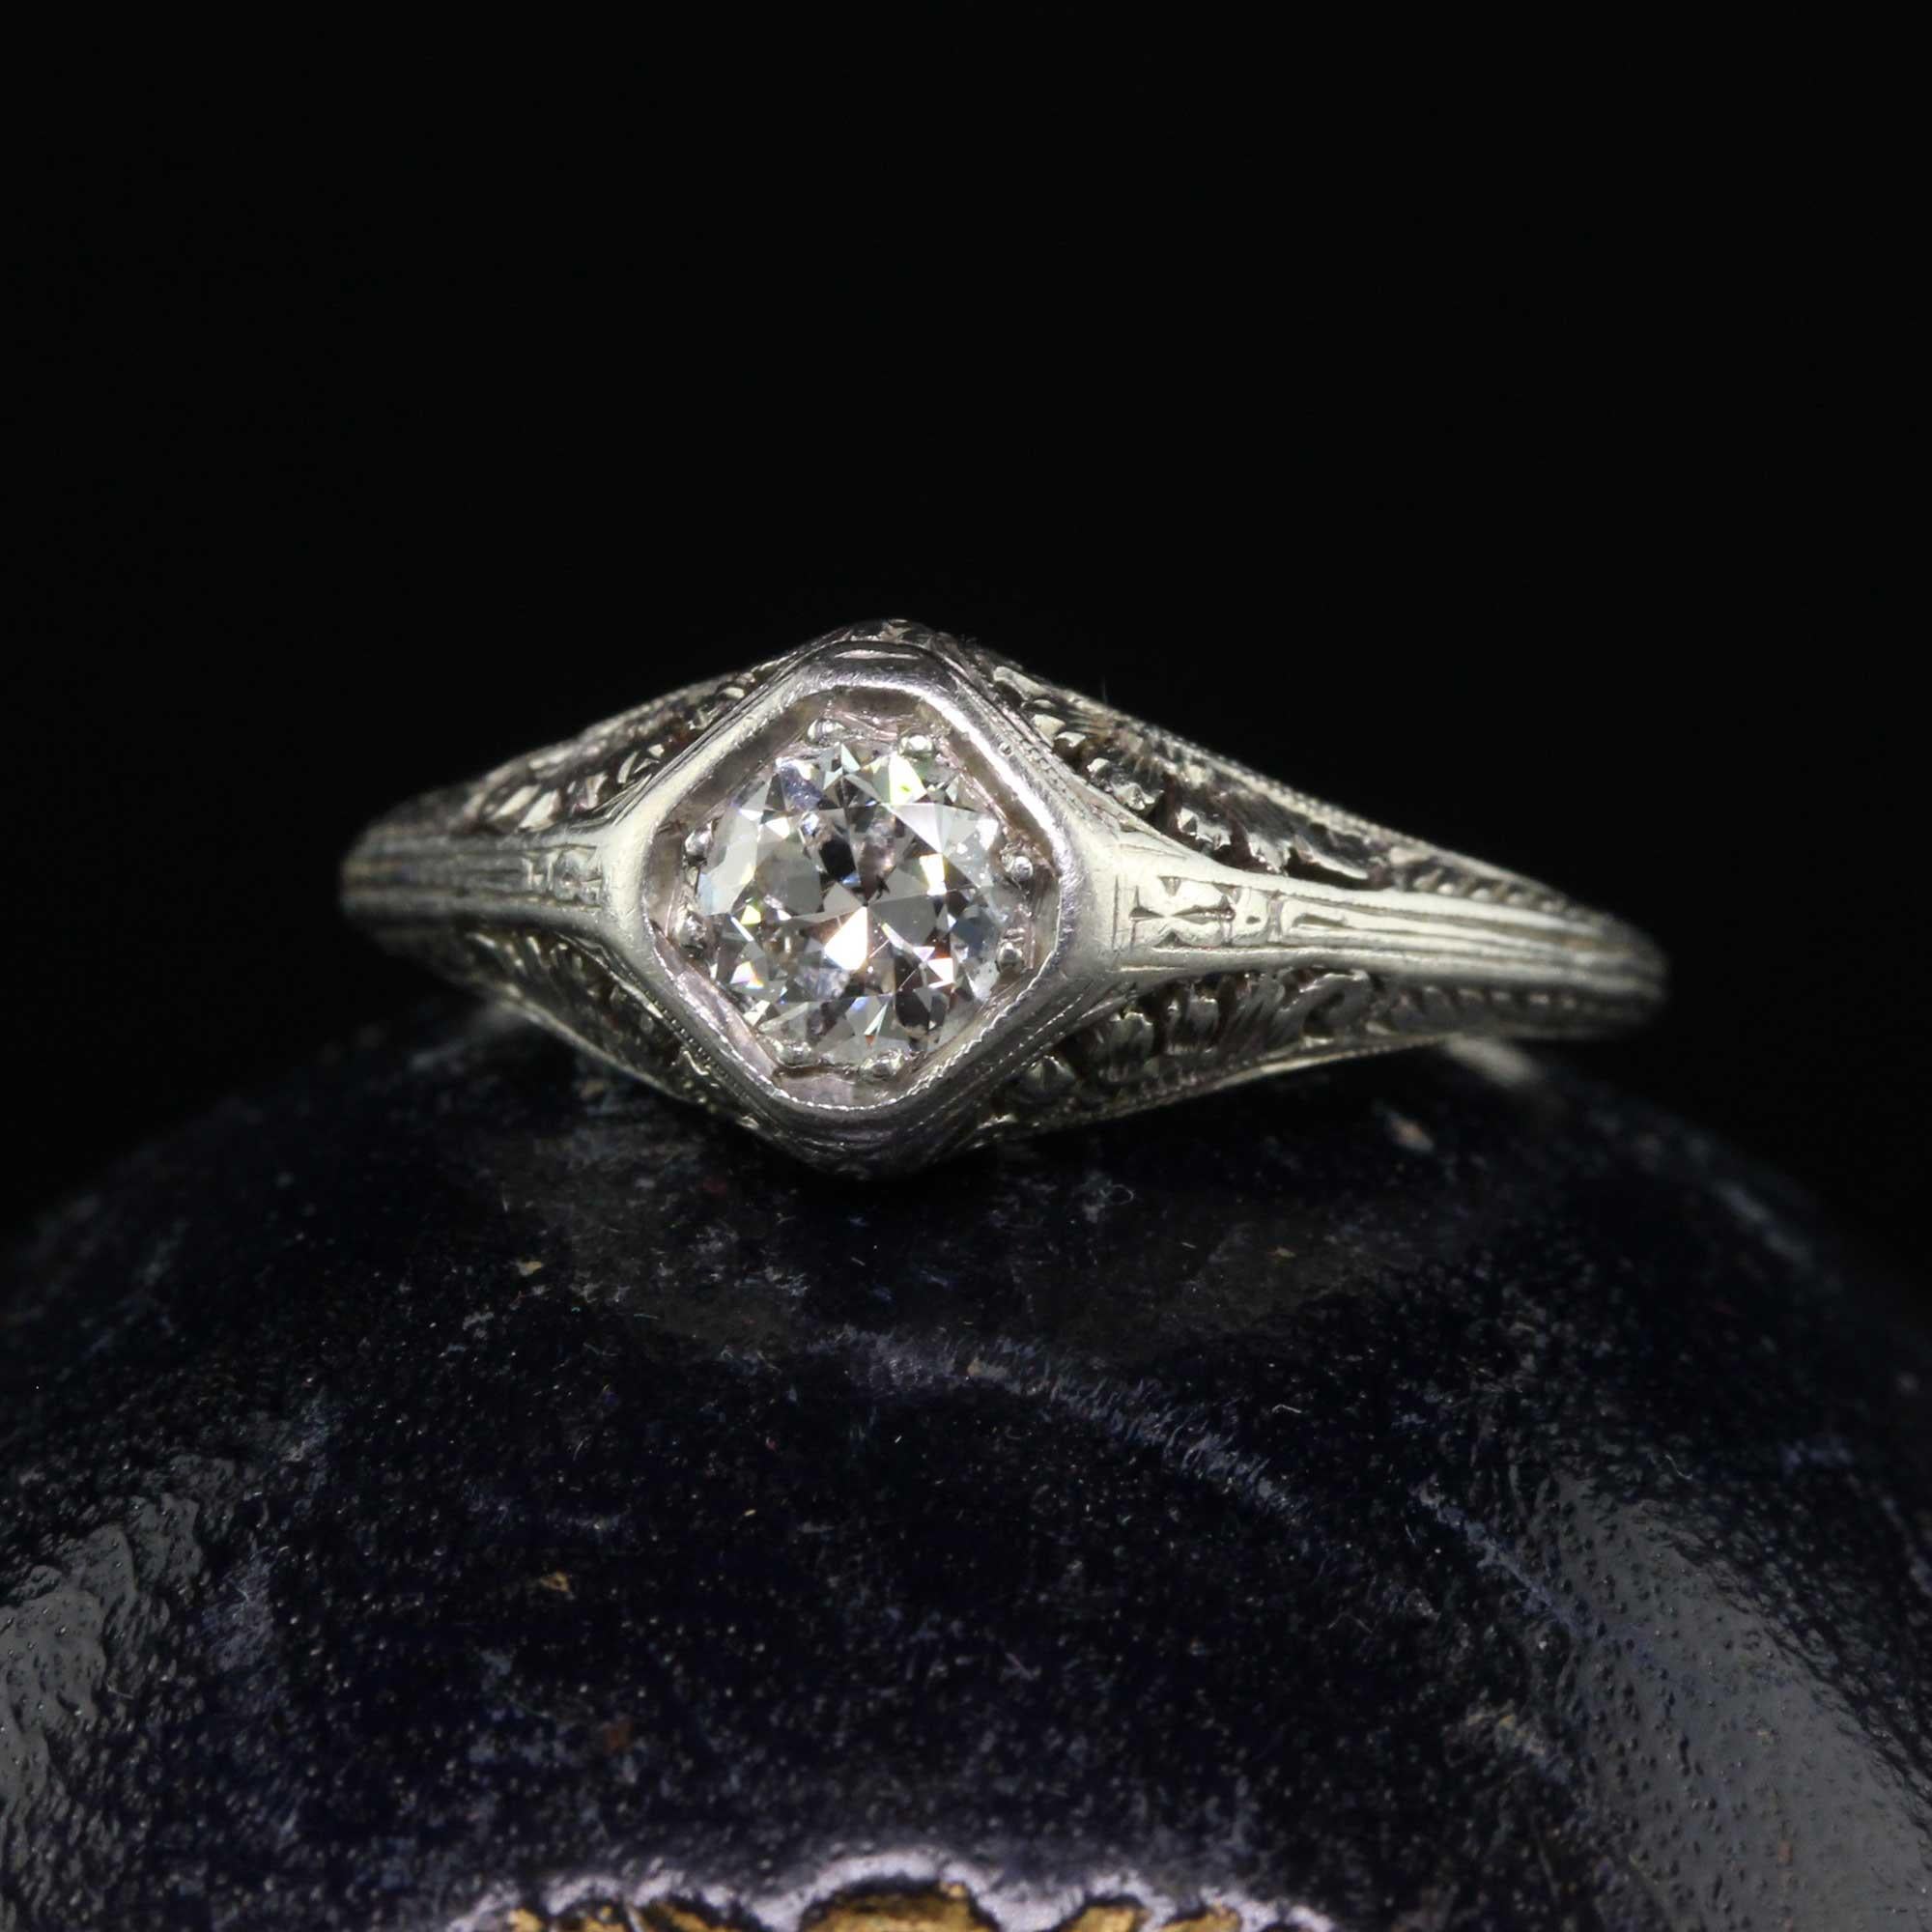 Beautiful Antique Edwardian Platinum Old European Diamond Filigree Engagement Ring. This incredible engagement ring is crafted in platinum. This beautiful ring has an old European cut diamond in the center of an incredible Art Deco mounting with a